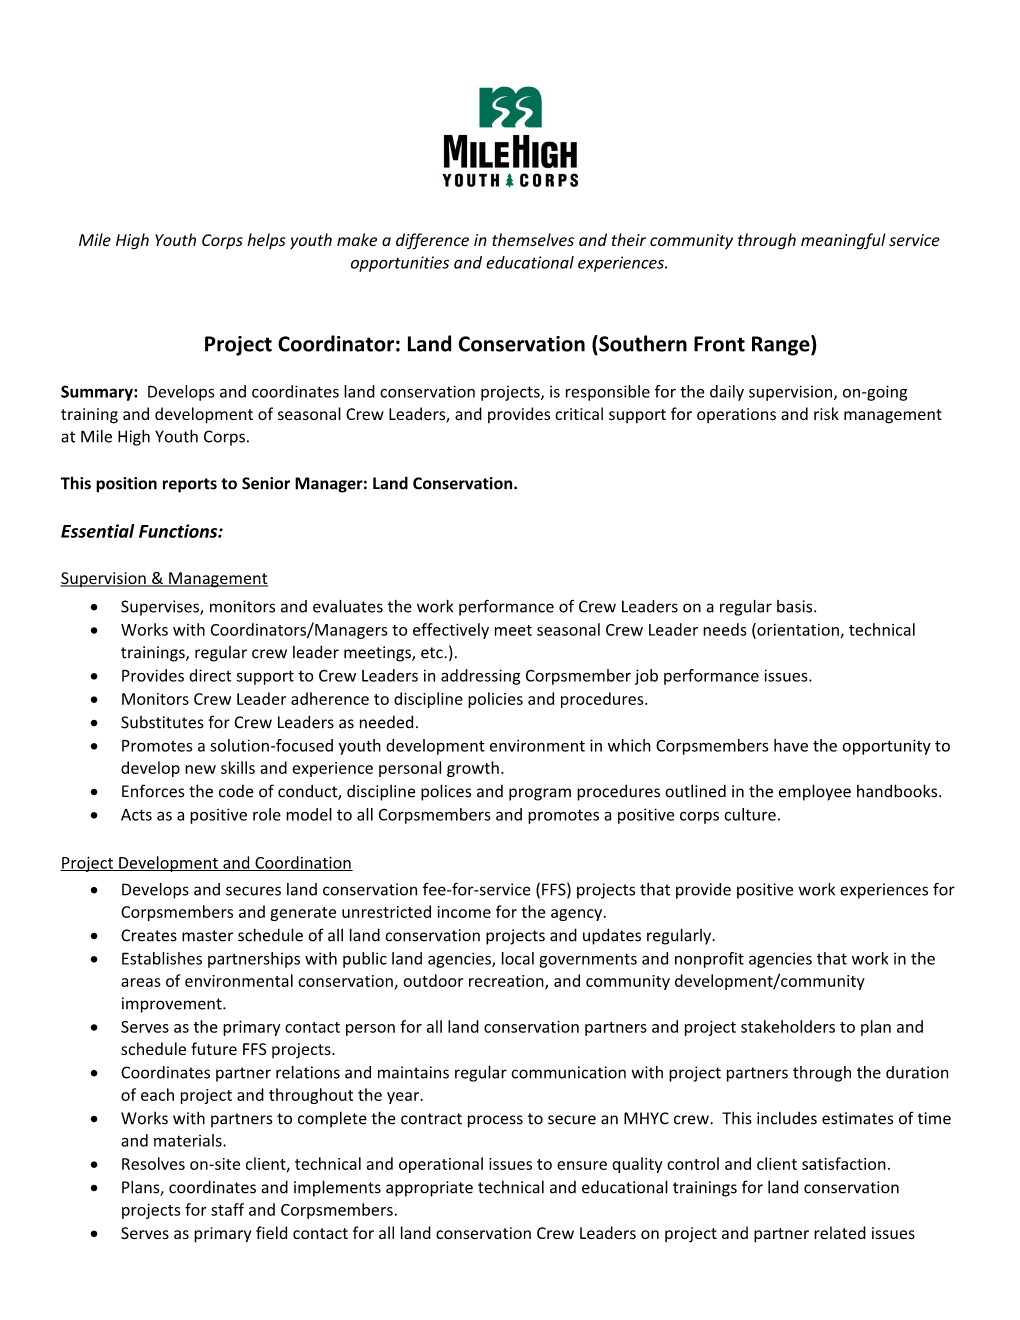 Project Coordinator: Land Conservation (Southern Front Range)